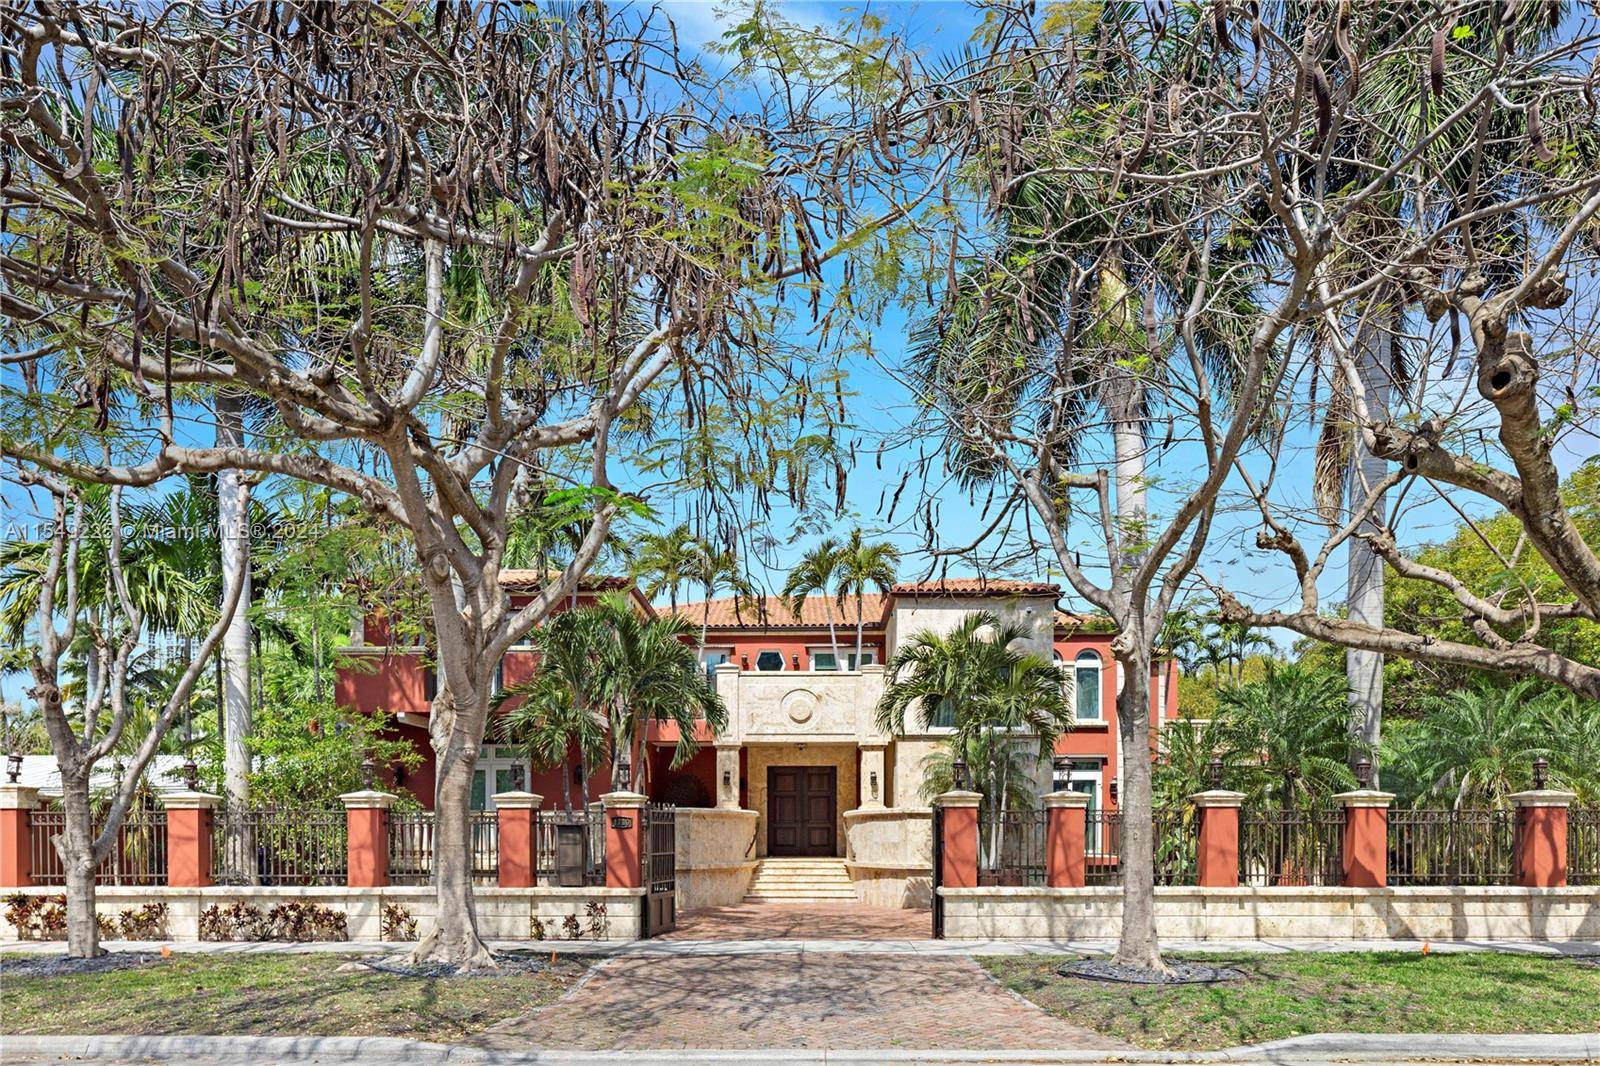 Stunning Estate Single Family Home in Brickell Area Historic South Miami Avenue, Oversized corner lot 13, 500SF, Home has 8, 080 SF AC space with 6 Bed and 6.